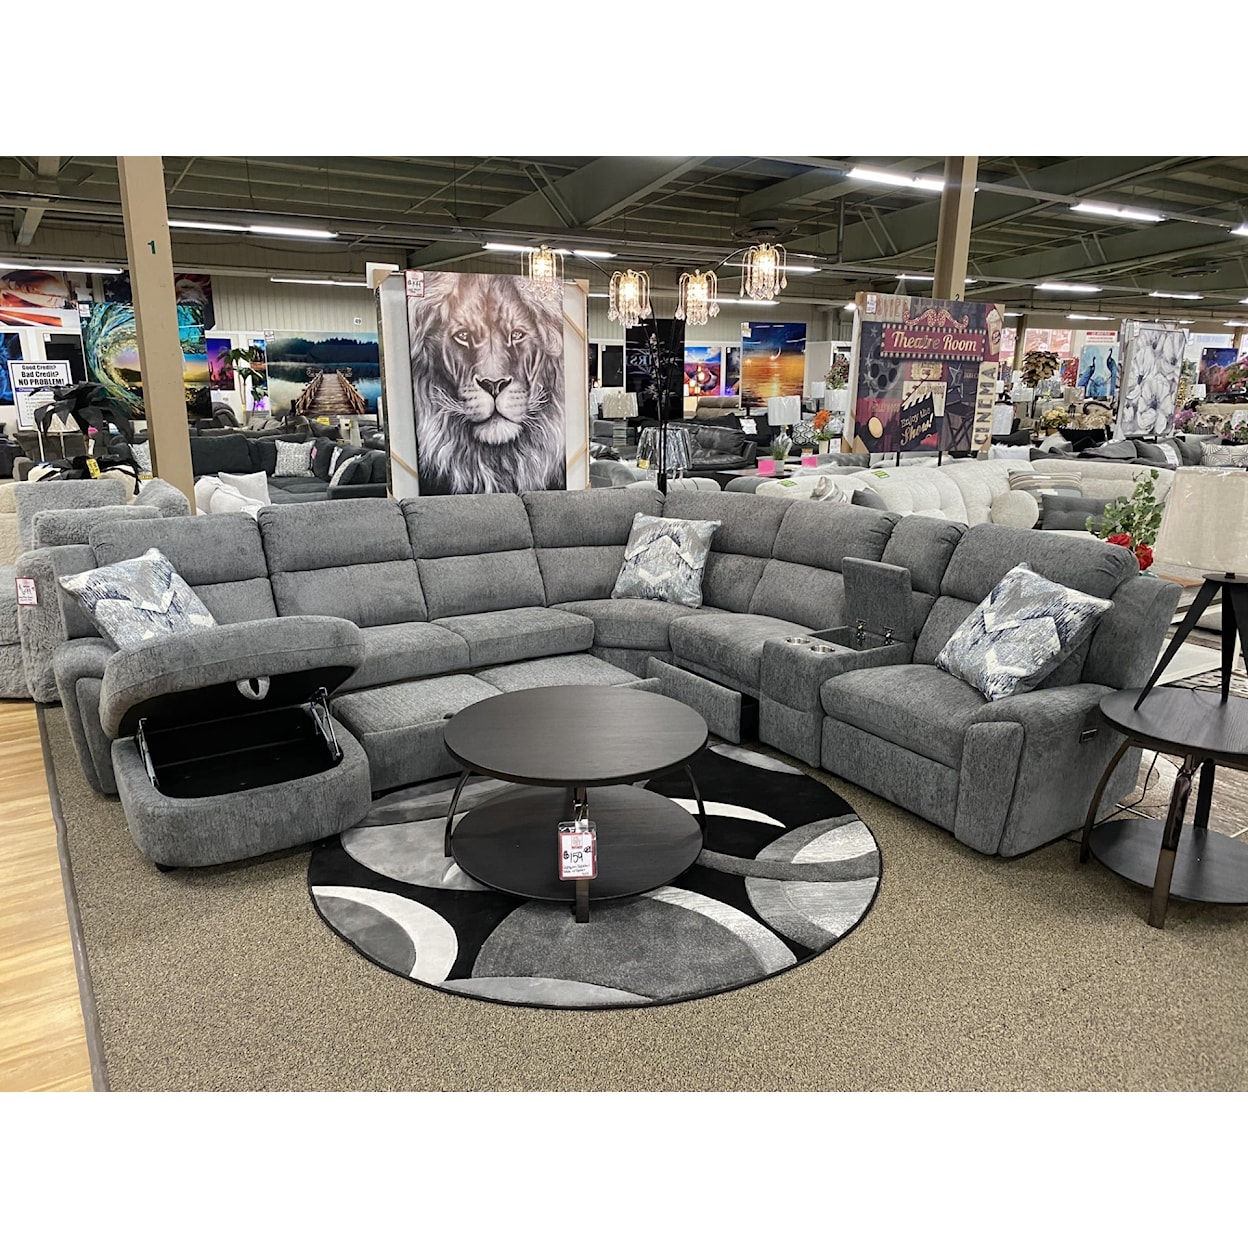 Henglin Home Furnishings Belize BELIZE GREY 6 PIECE POWER SECTIONAL | WITH S